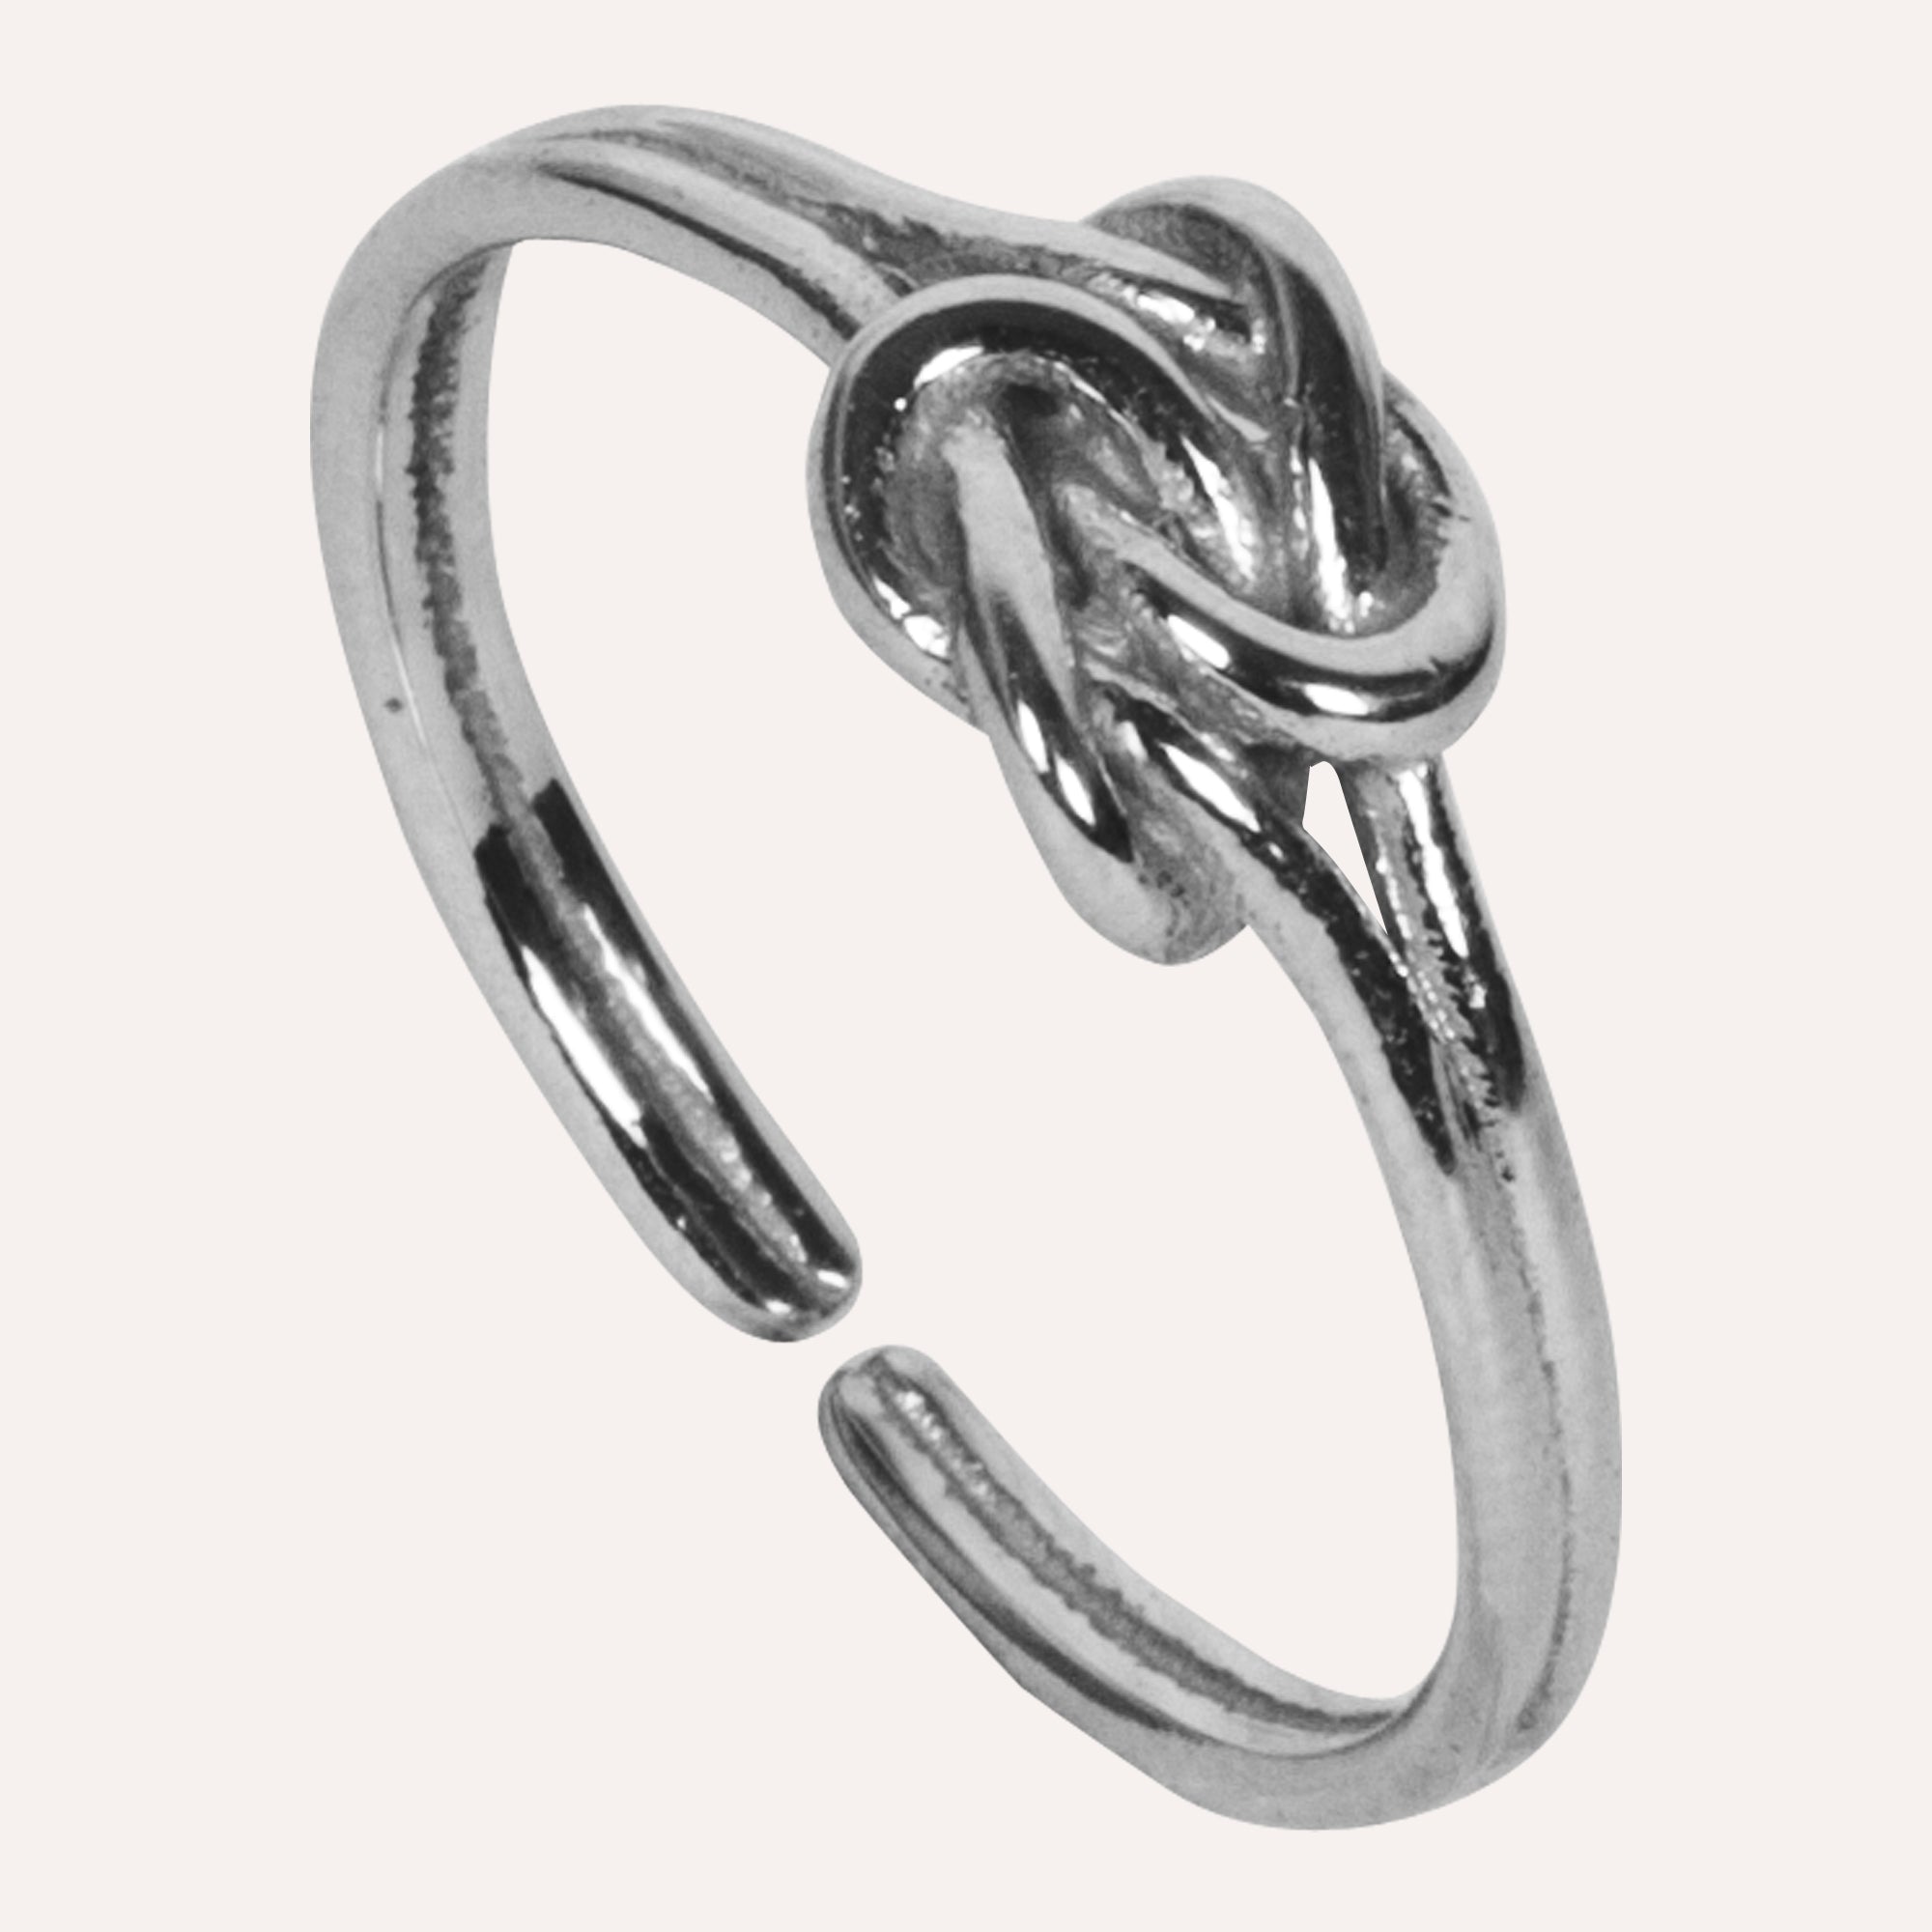 Unique Infinity Knot Double Chain Bracelet for Men in Sterling Silver